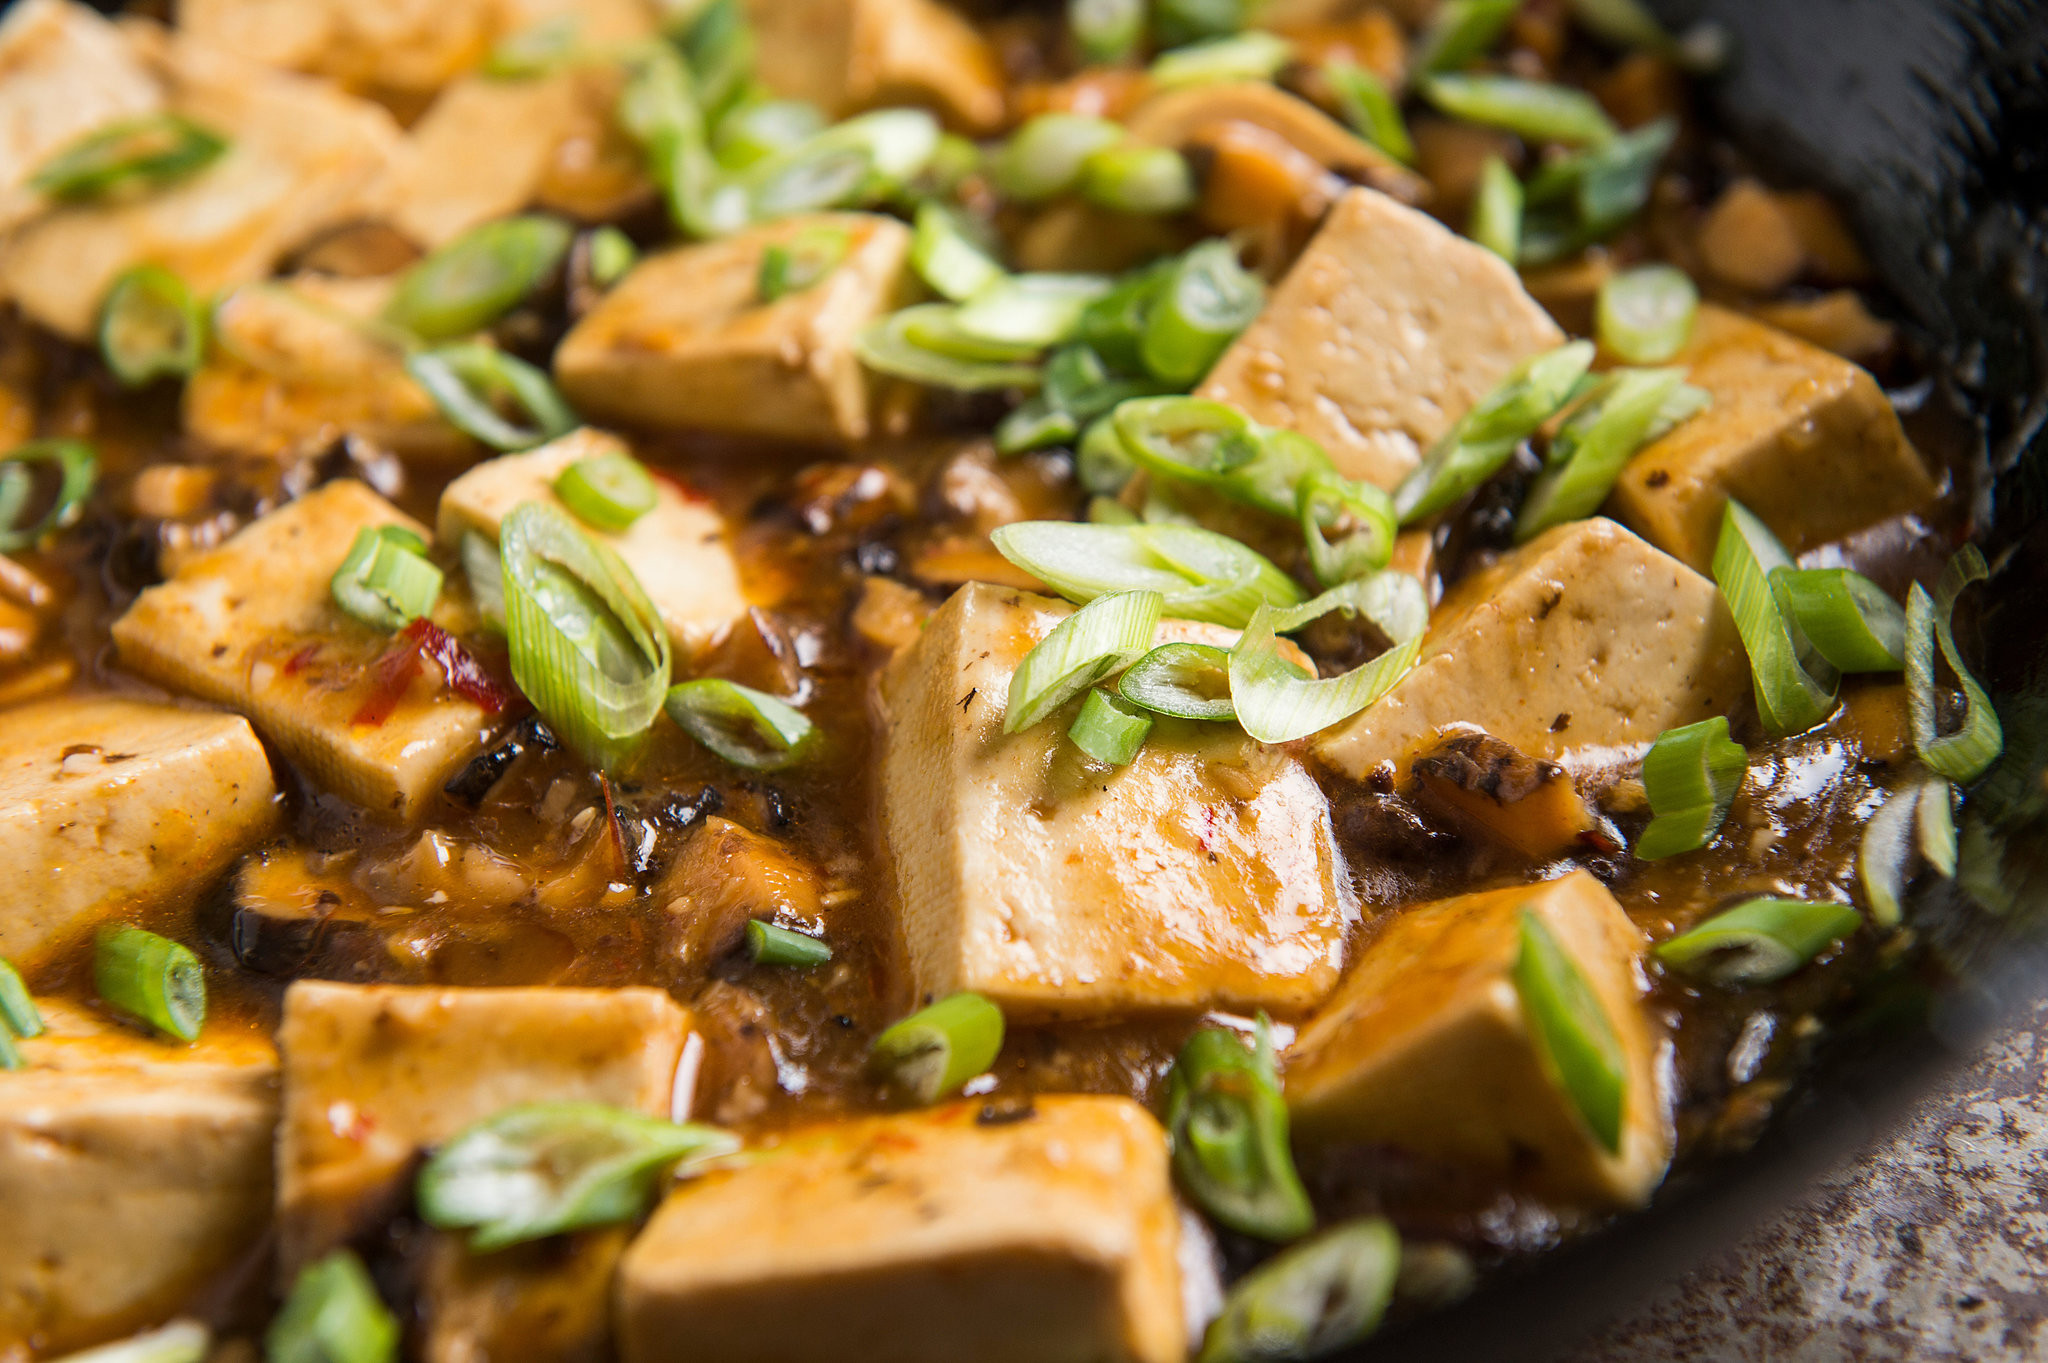 Cooking With Tofu Recipes
 Ve arian Mapo Tofu Recipe NYT Cooking